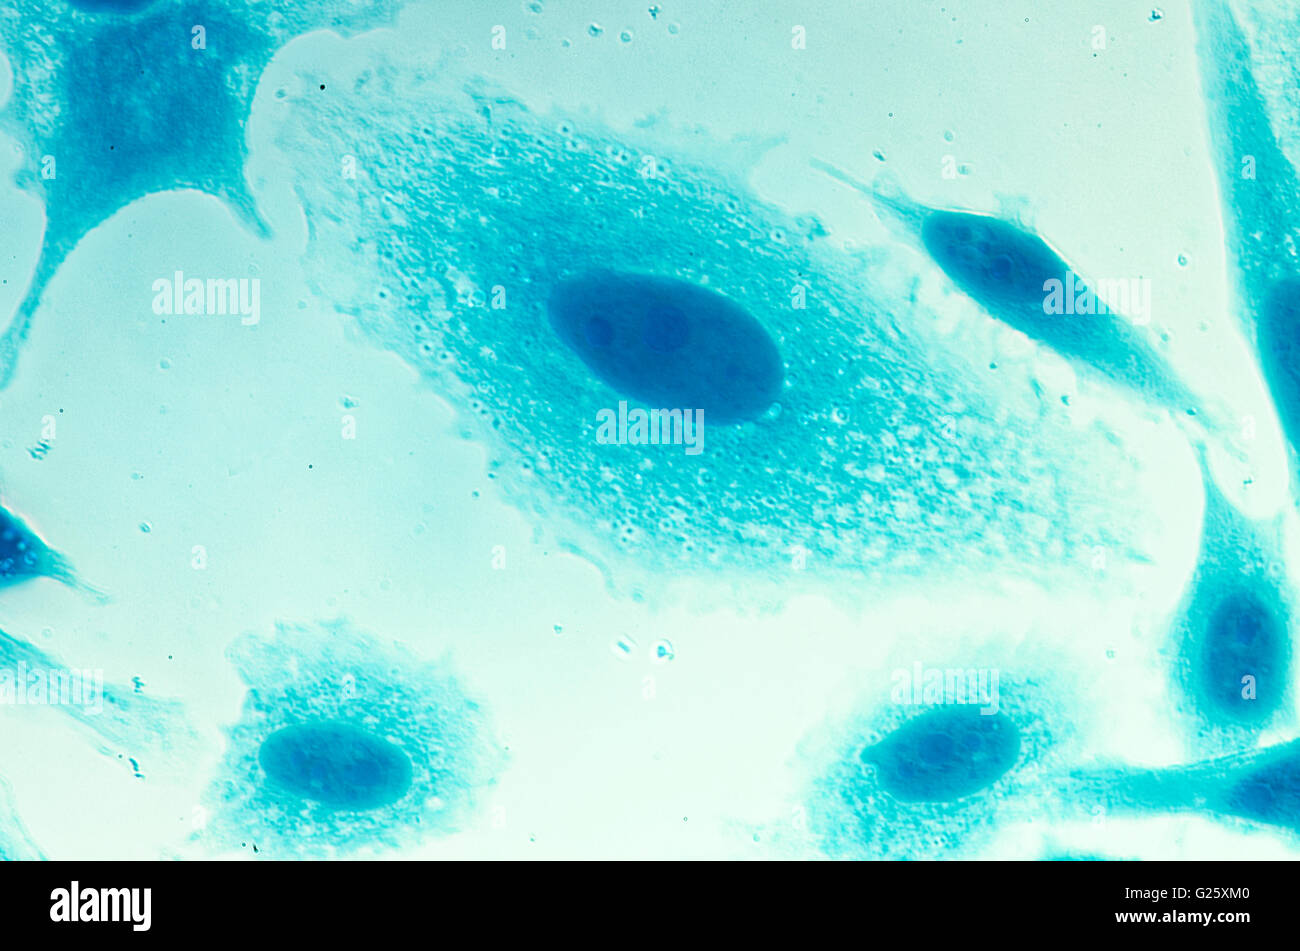 PC-3 human prostate cancer cells, stained with Coomassie blue, under differencial interference contrast microscope. Stock Photo